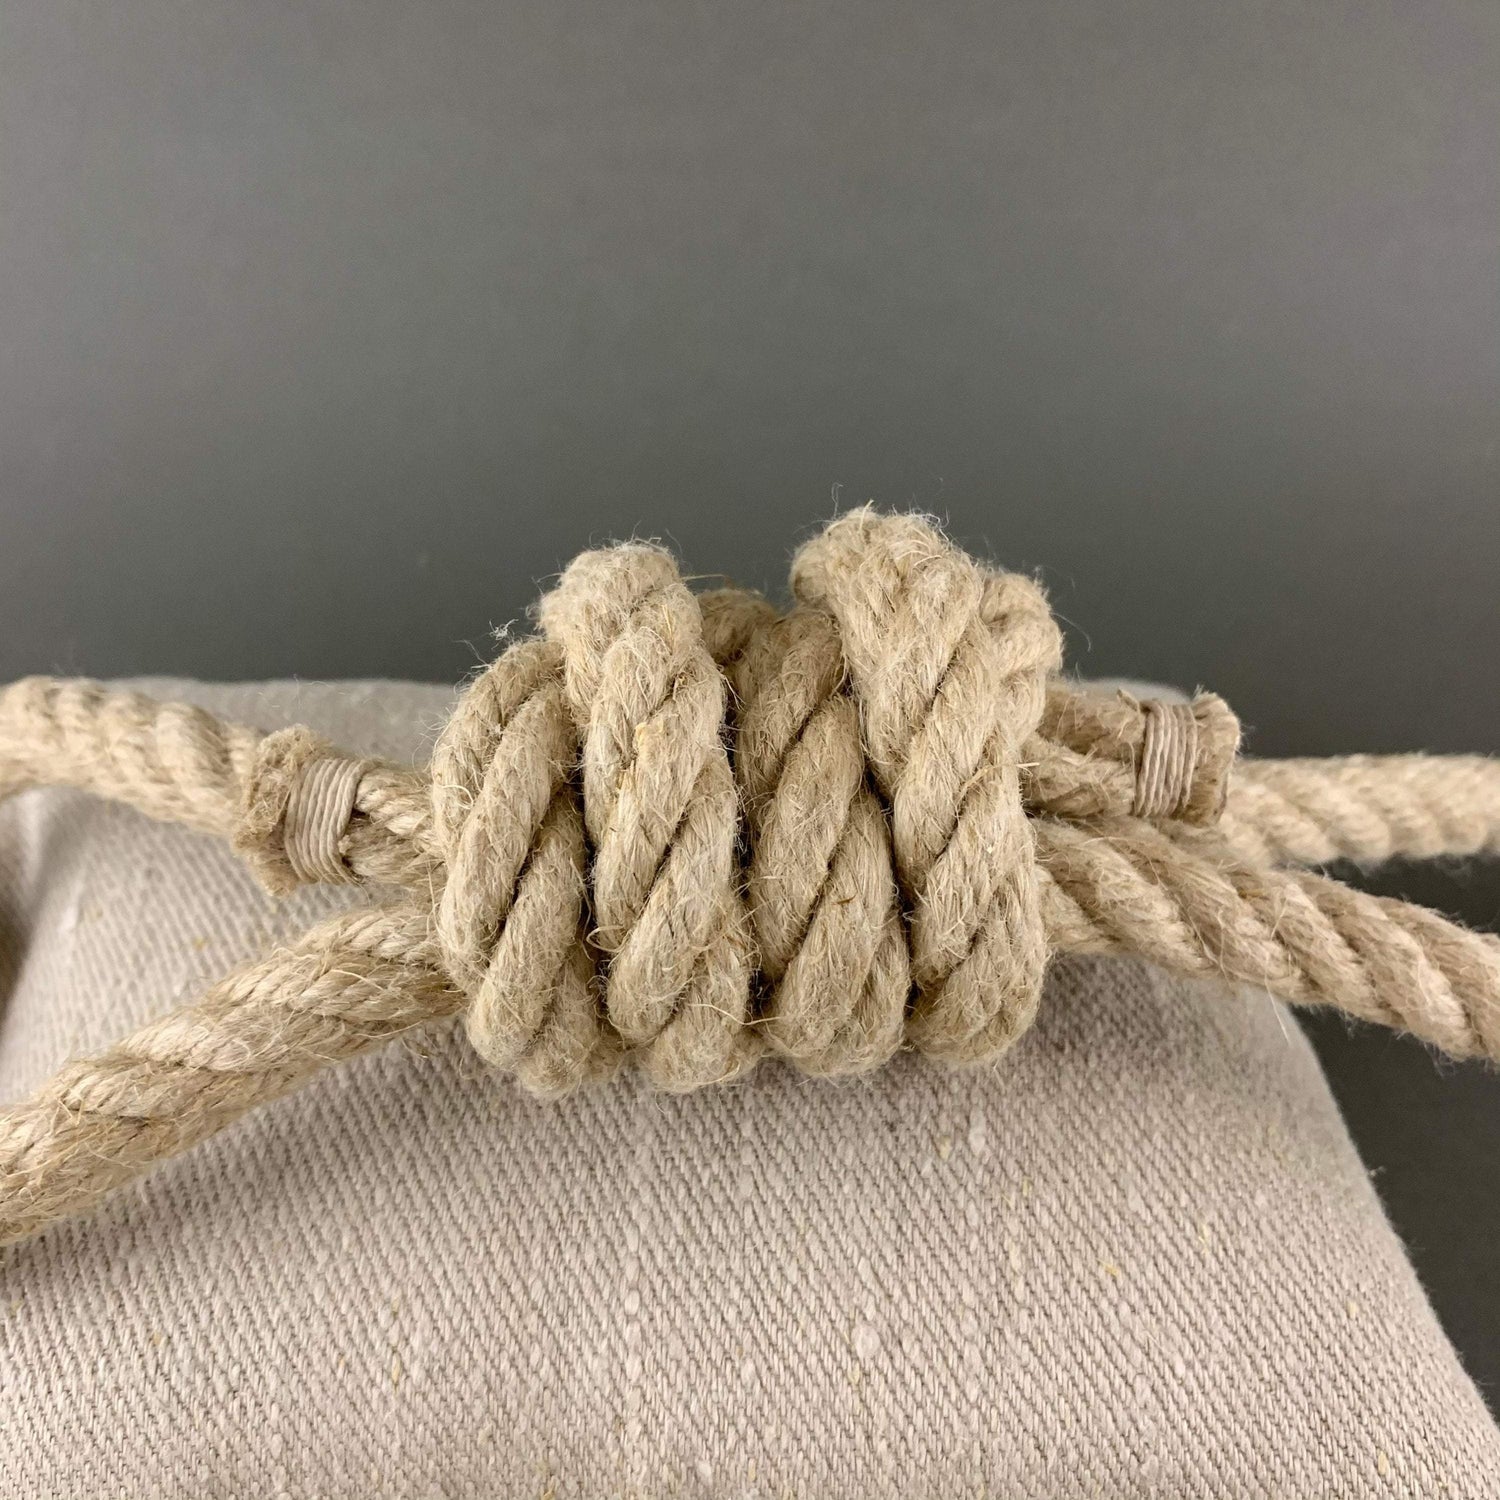 Natural hemp rope in dog toys